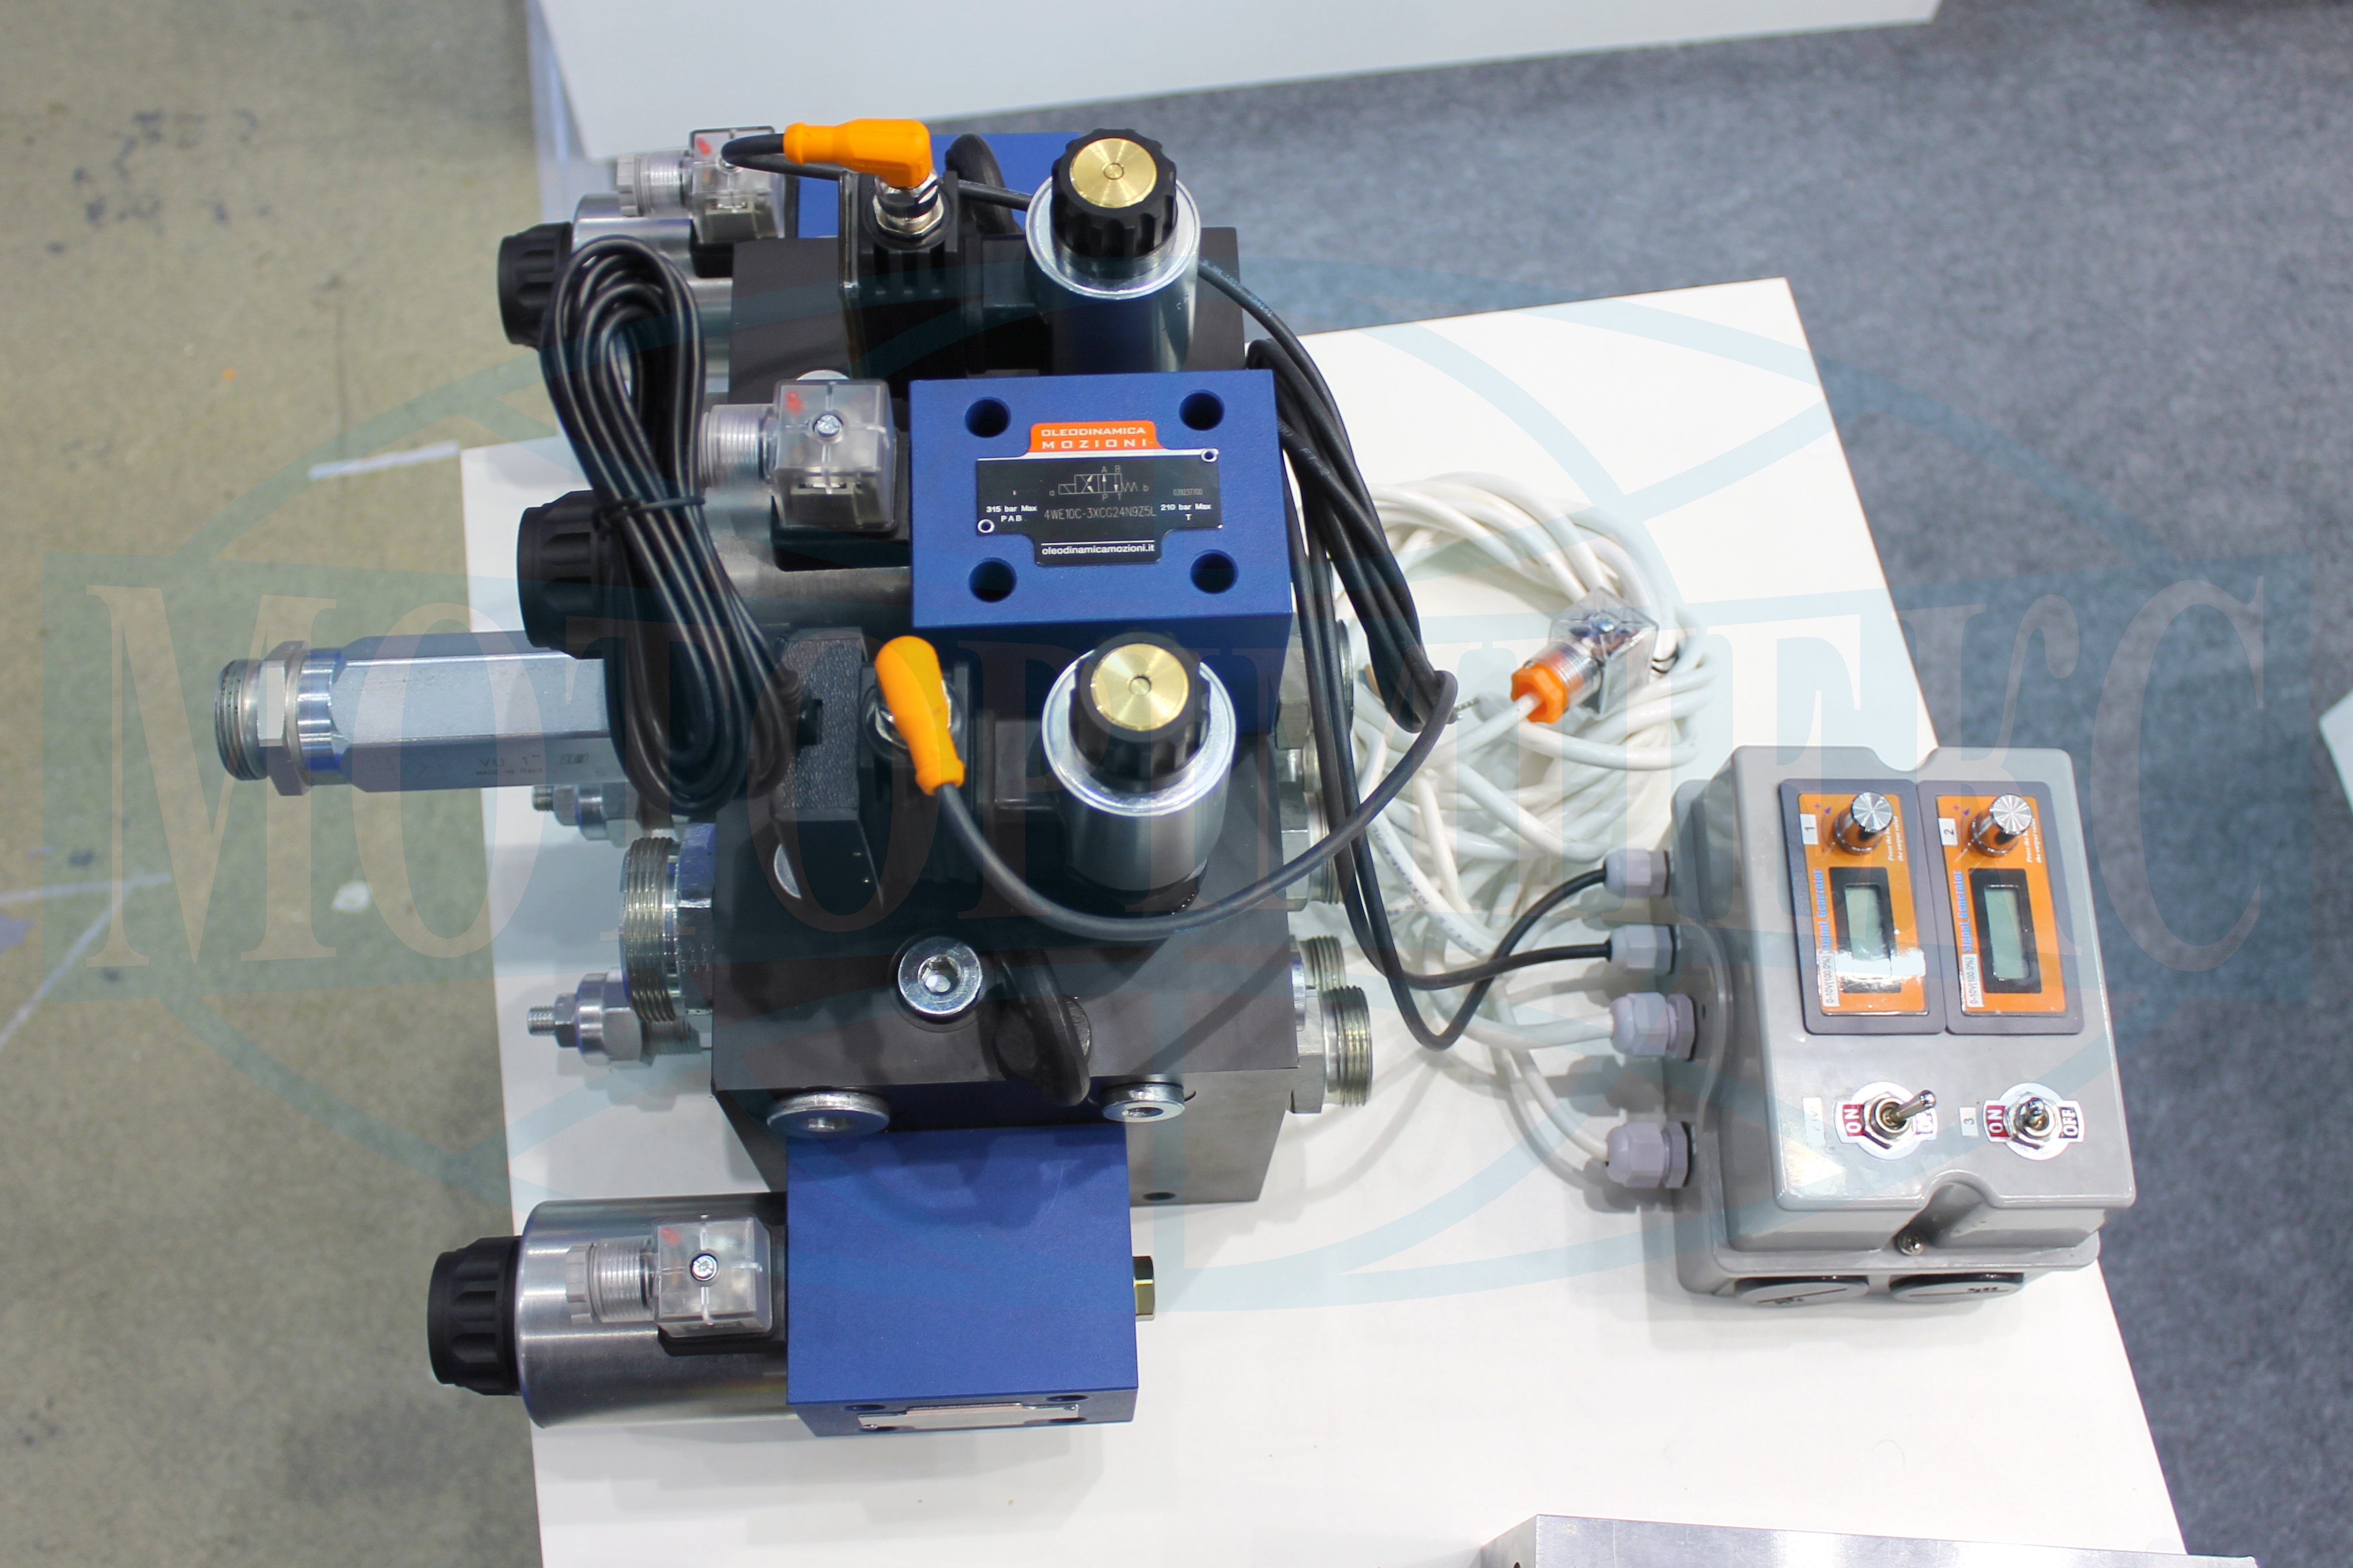 The hydraulic manifold with WE10 directional control valves of Oleodinamica Mozioni